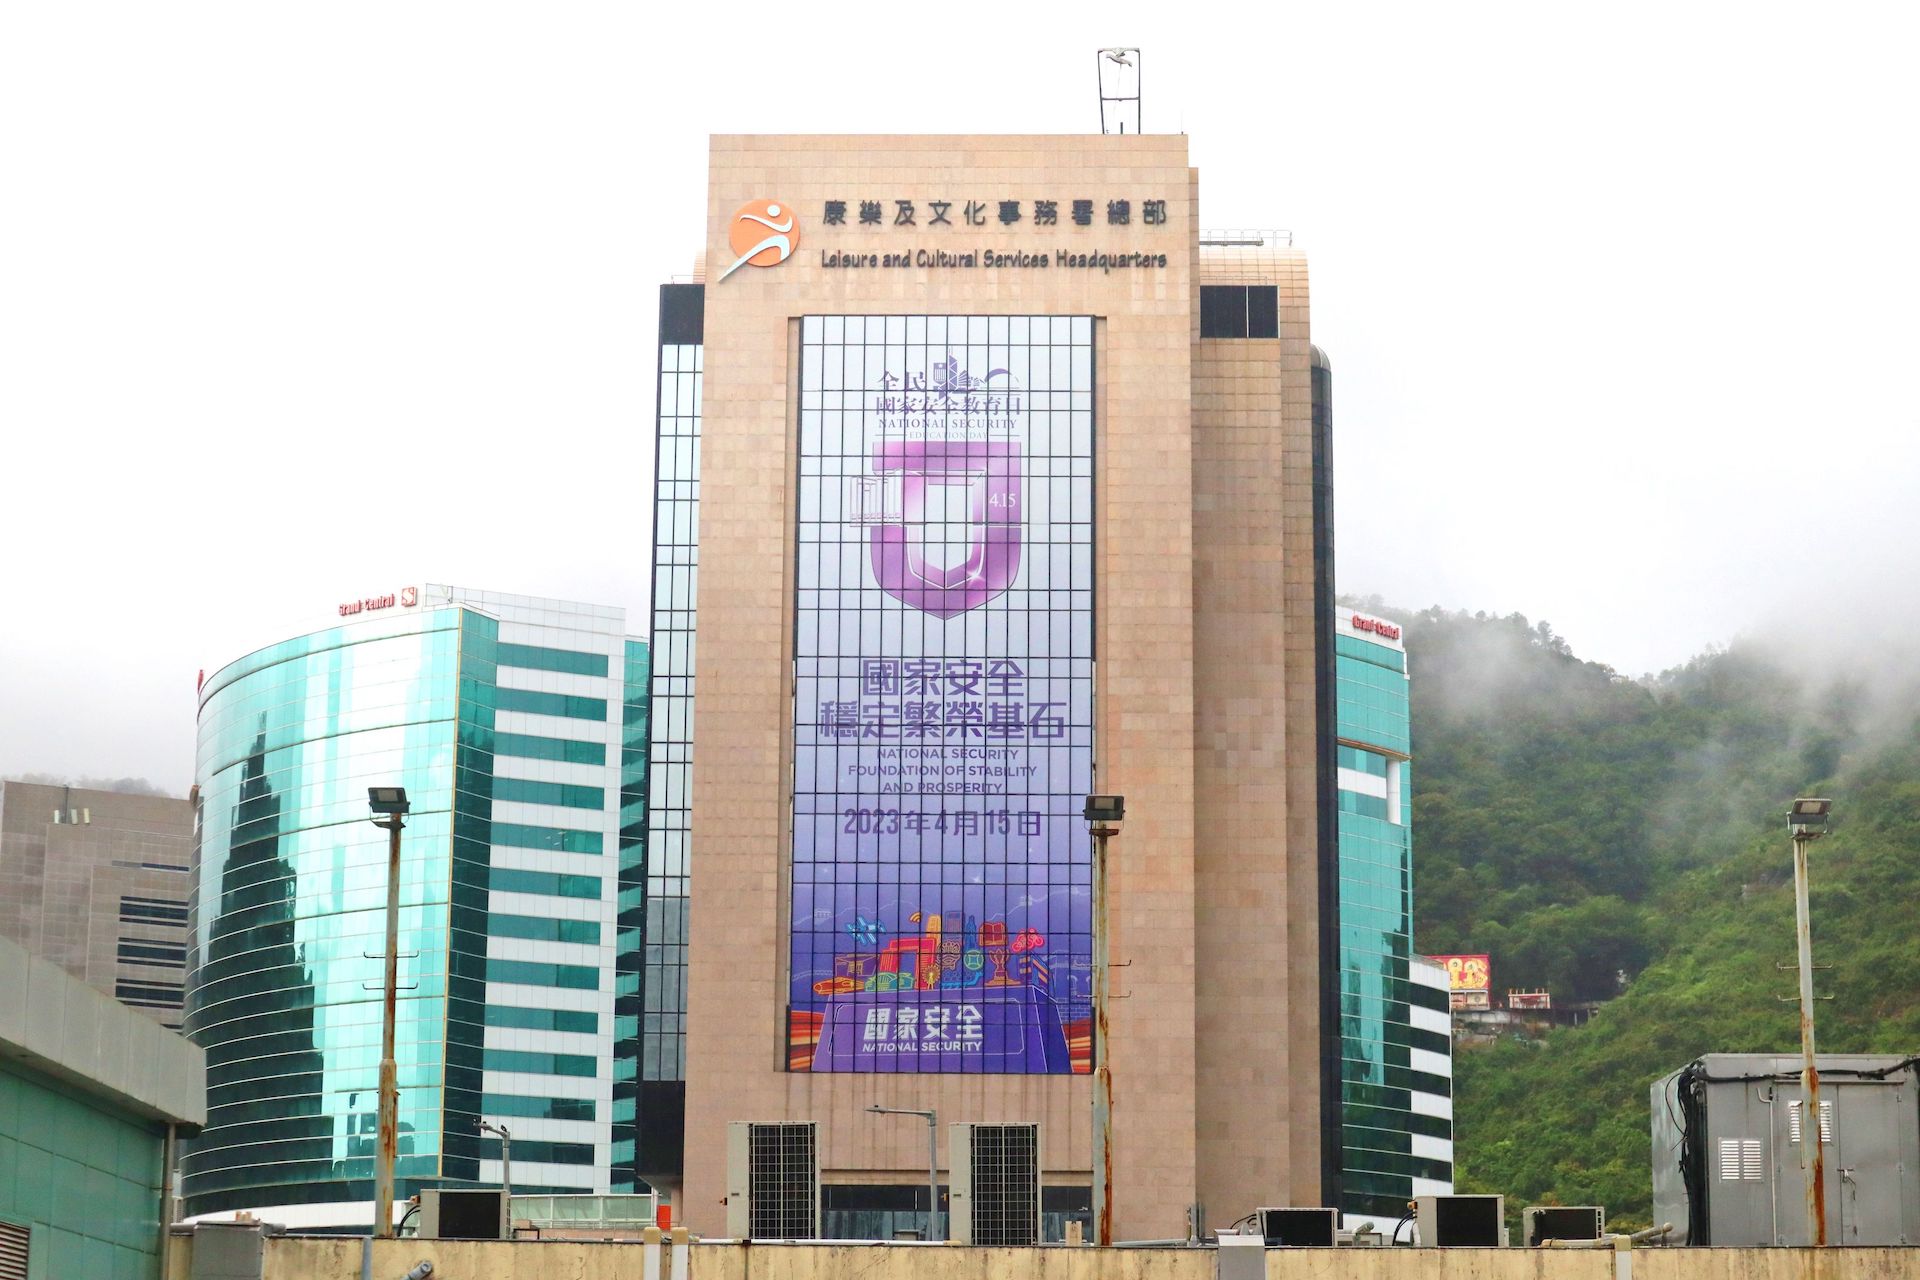 Leisure and Cultural Services Headquarters Curtain Wall (Shatin)